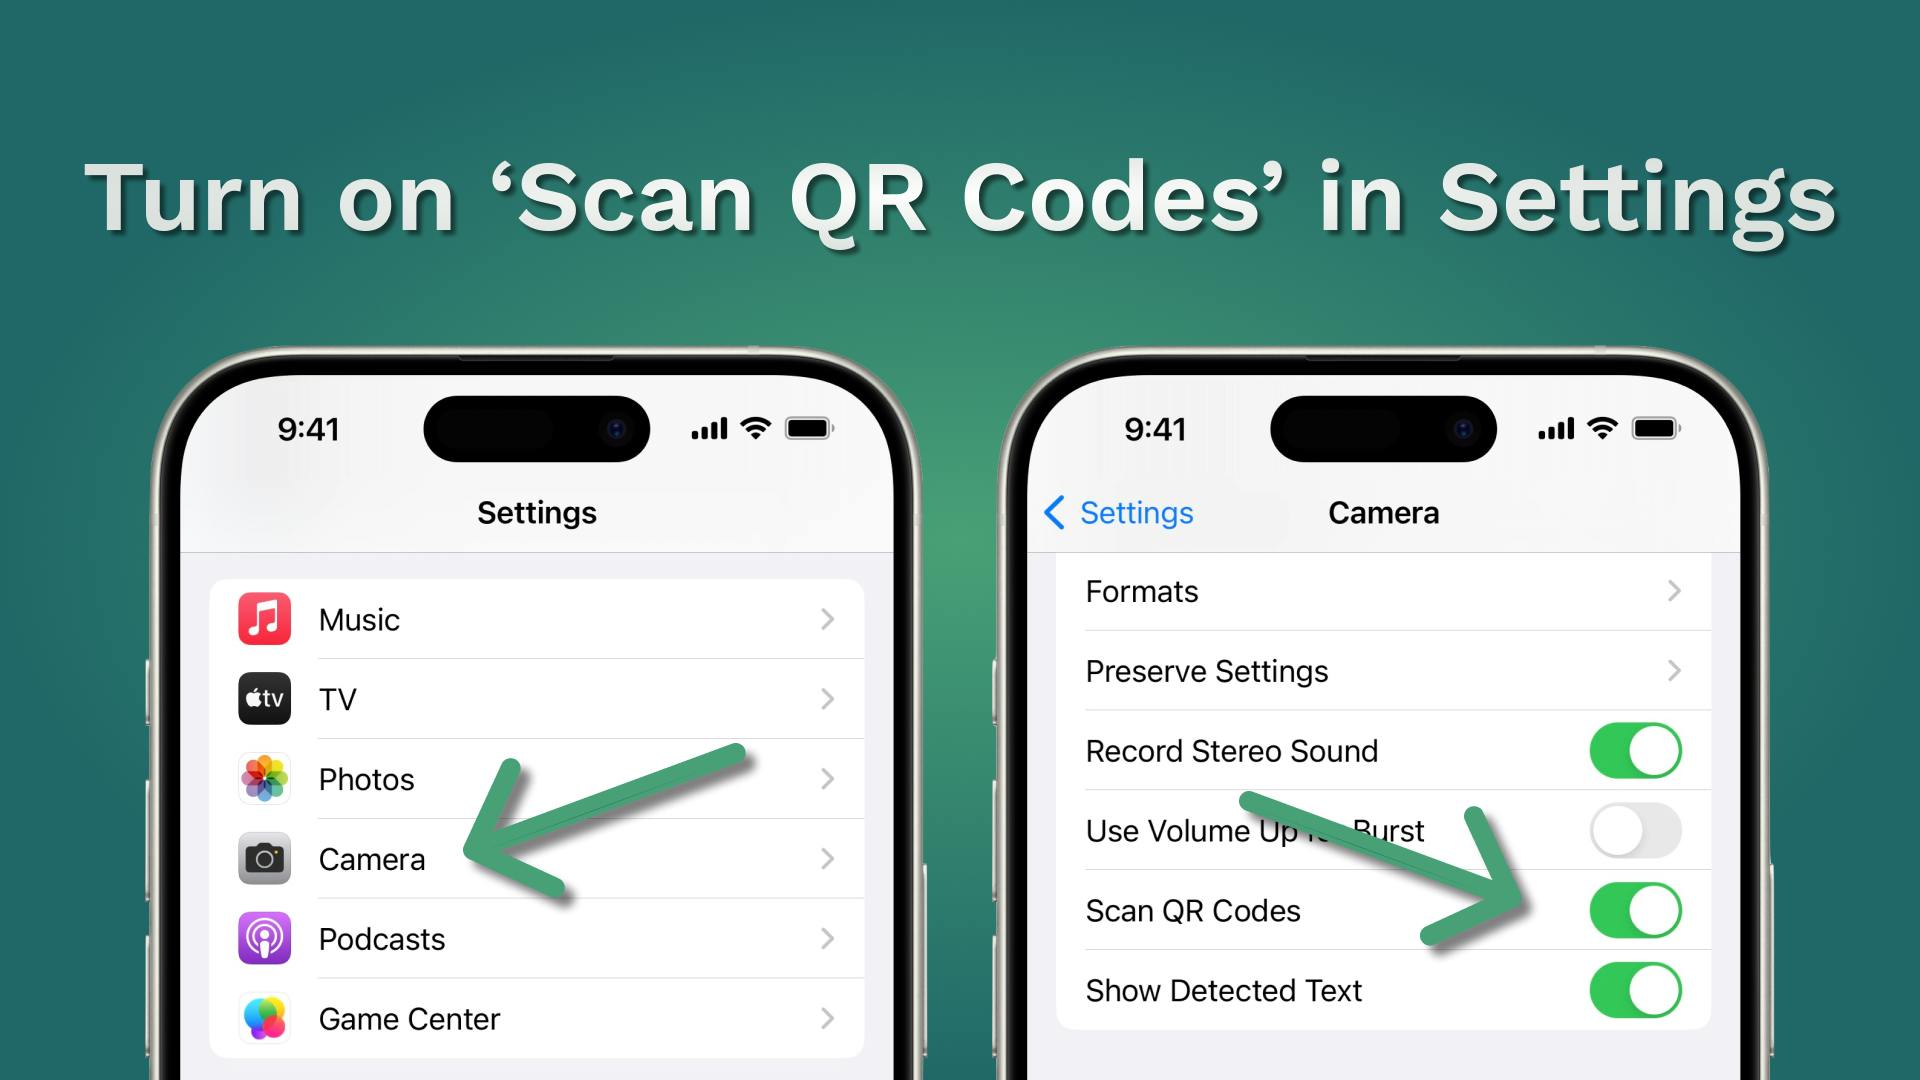 Scan QR codes in settings: a smartphone screen displaying the settings menu with a QR code scanner option.